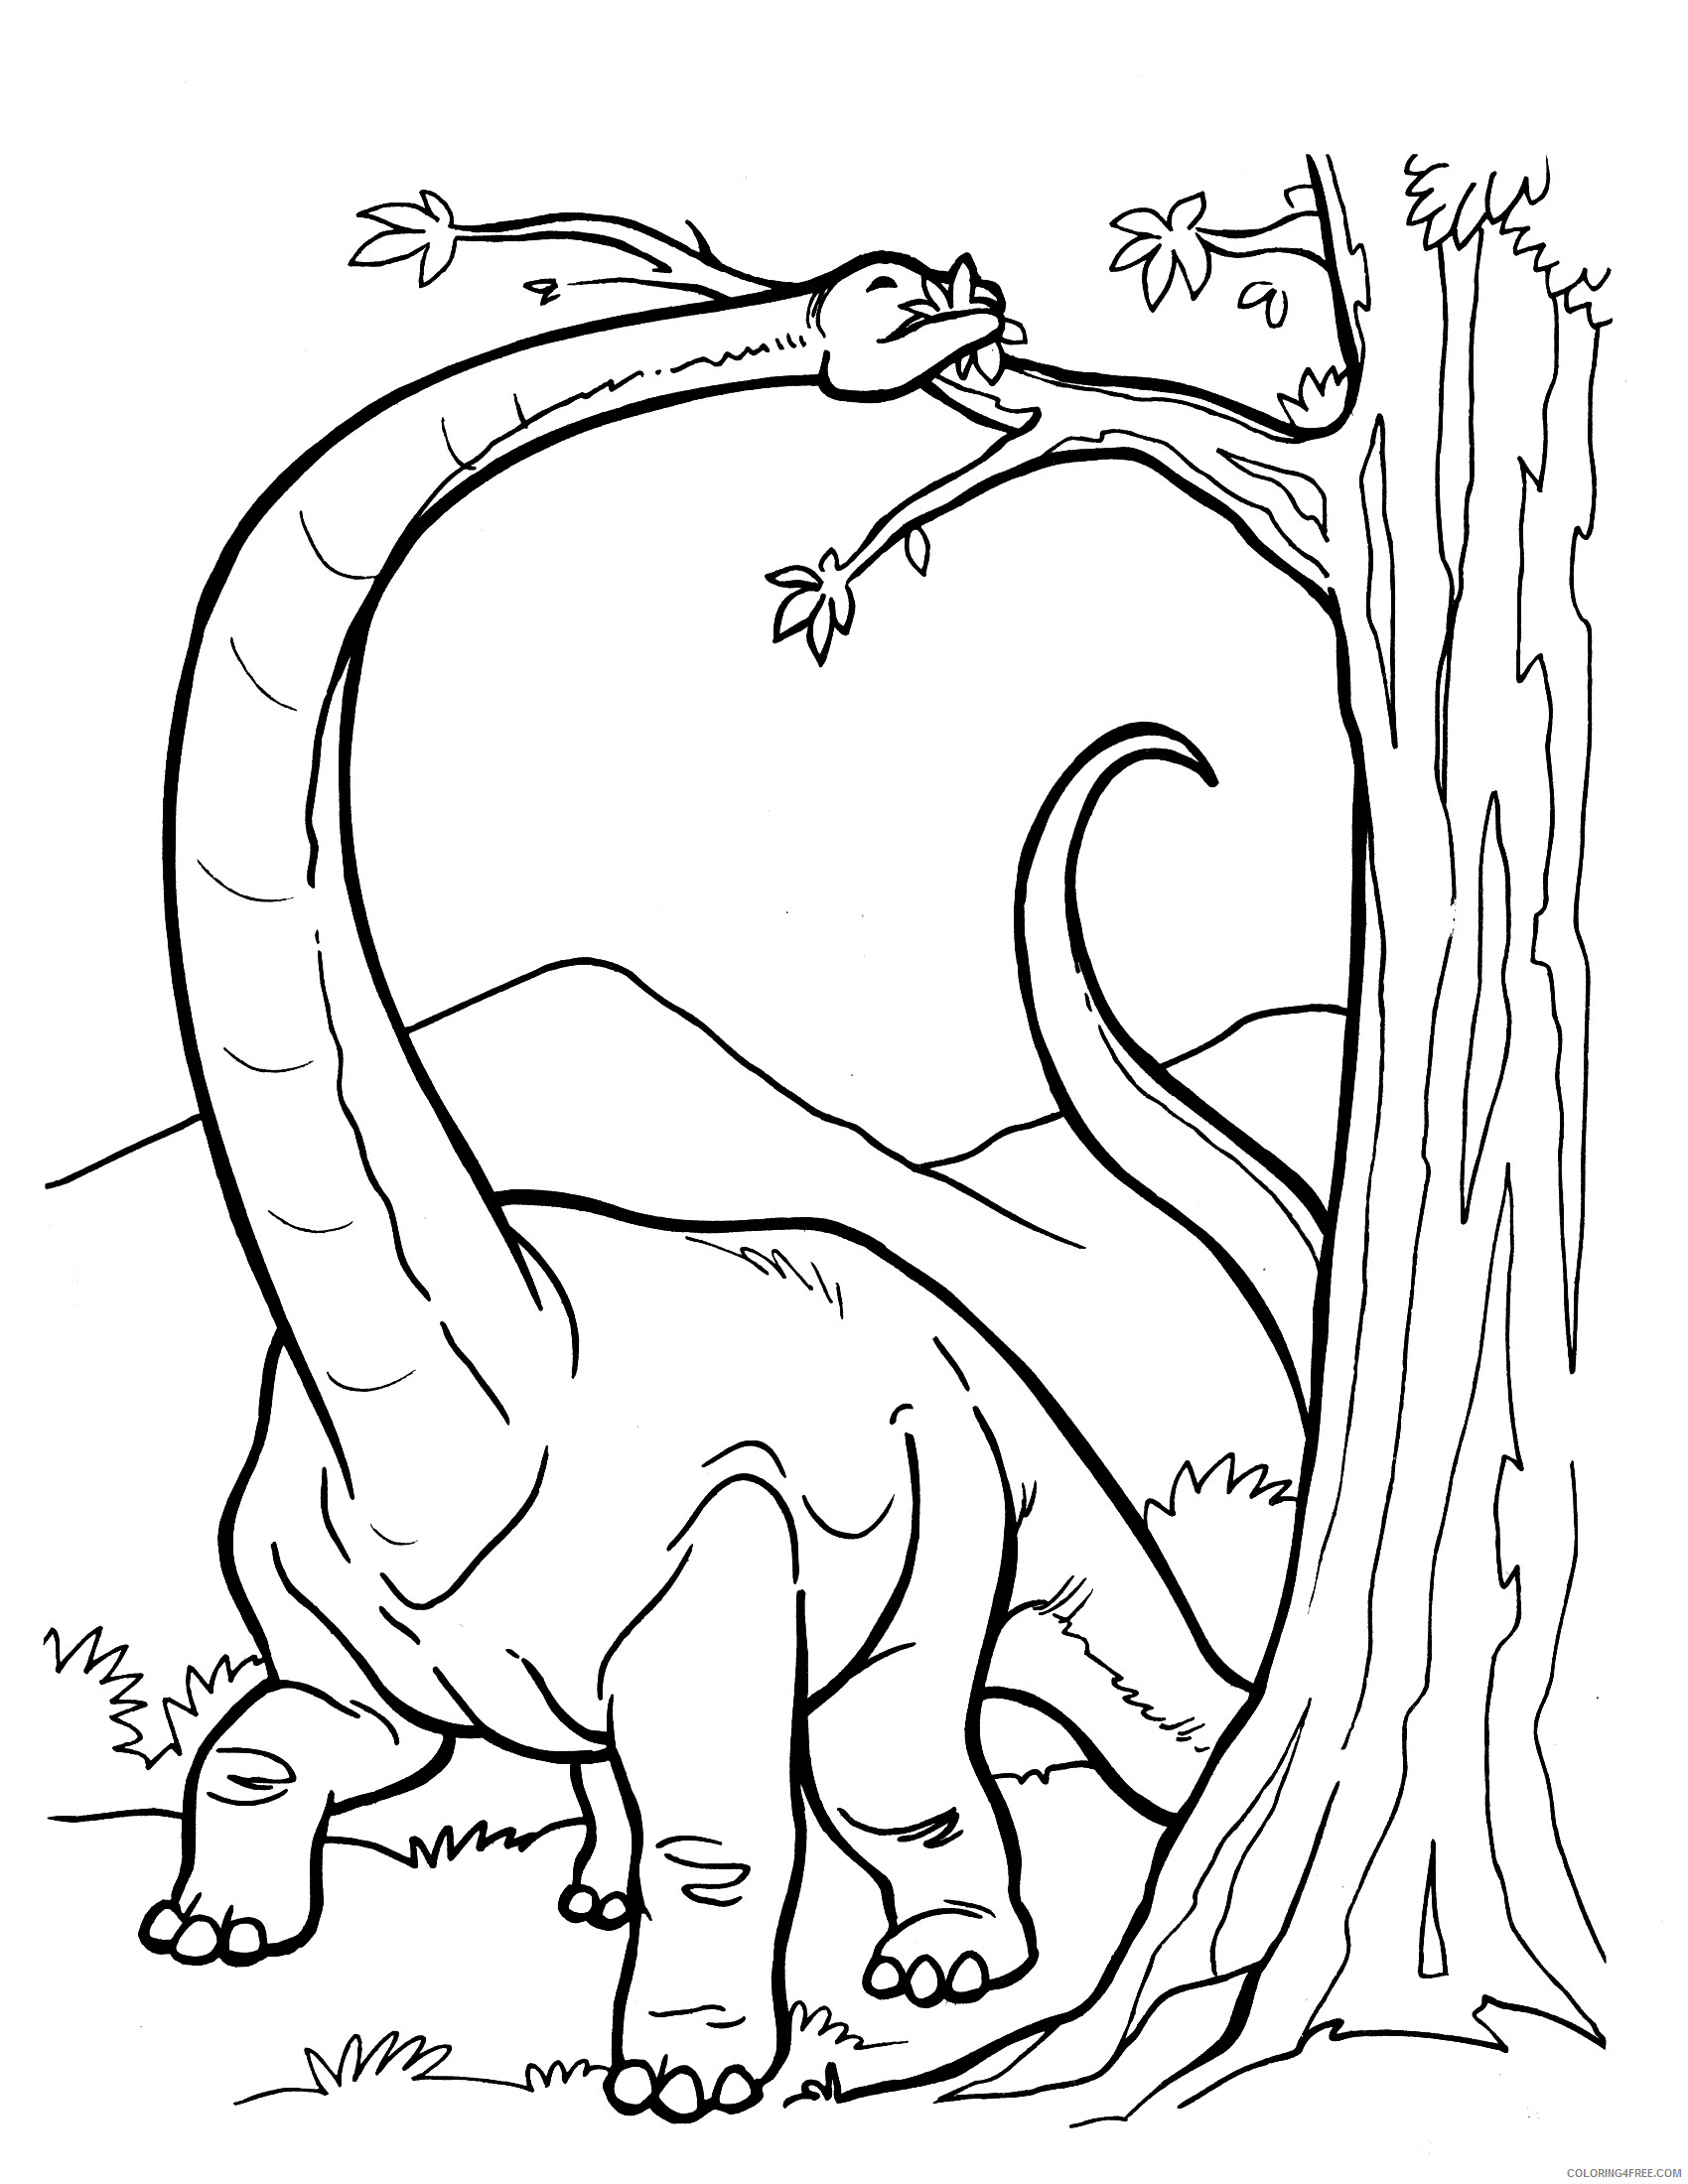 Dinosaurs Coloring Pages for boys Realistic Dinosaur Printable 2020 0333 Coloring4free